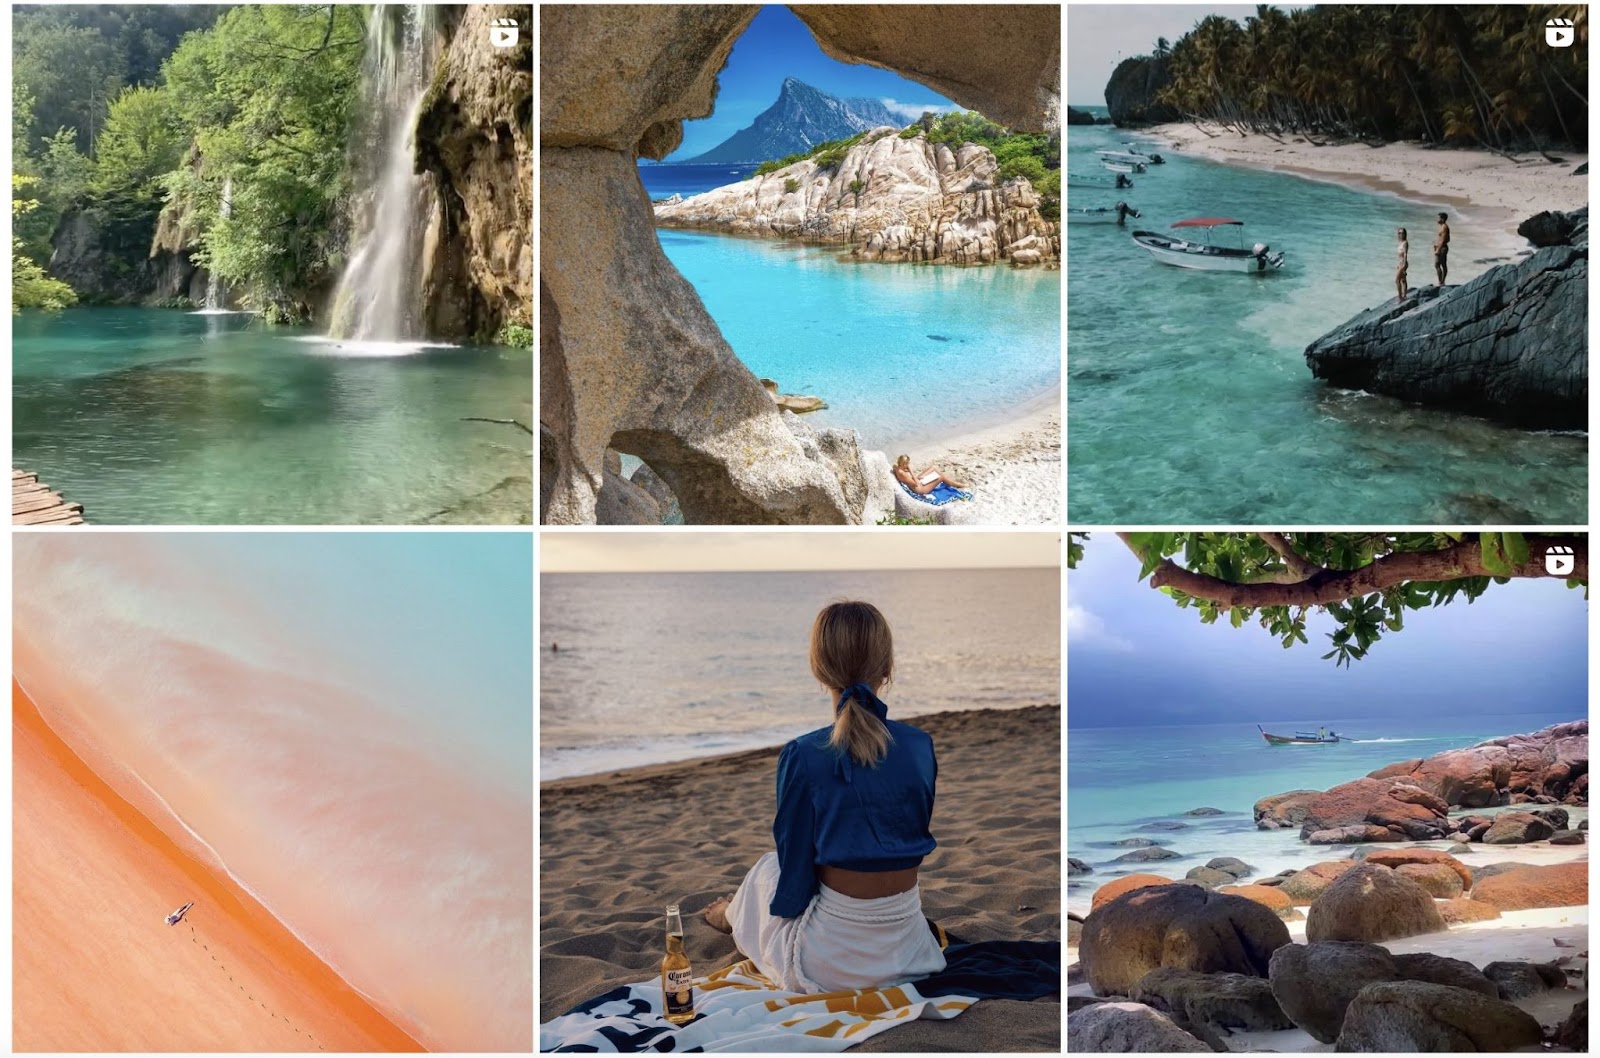 Instagram images for Corona’s #ThisIsLiving campaign